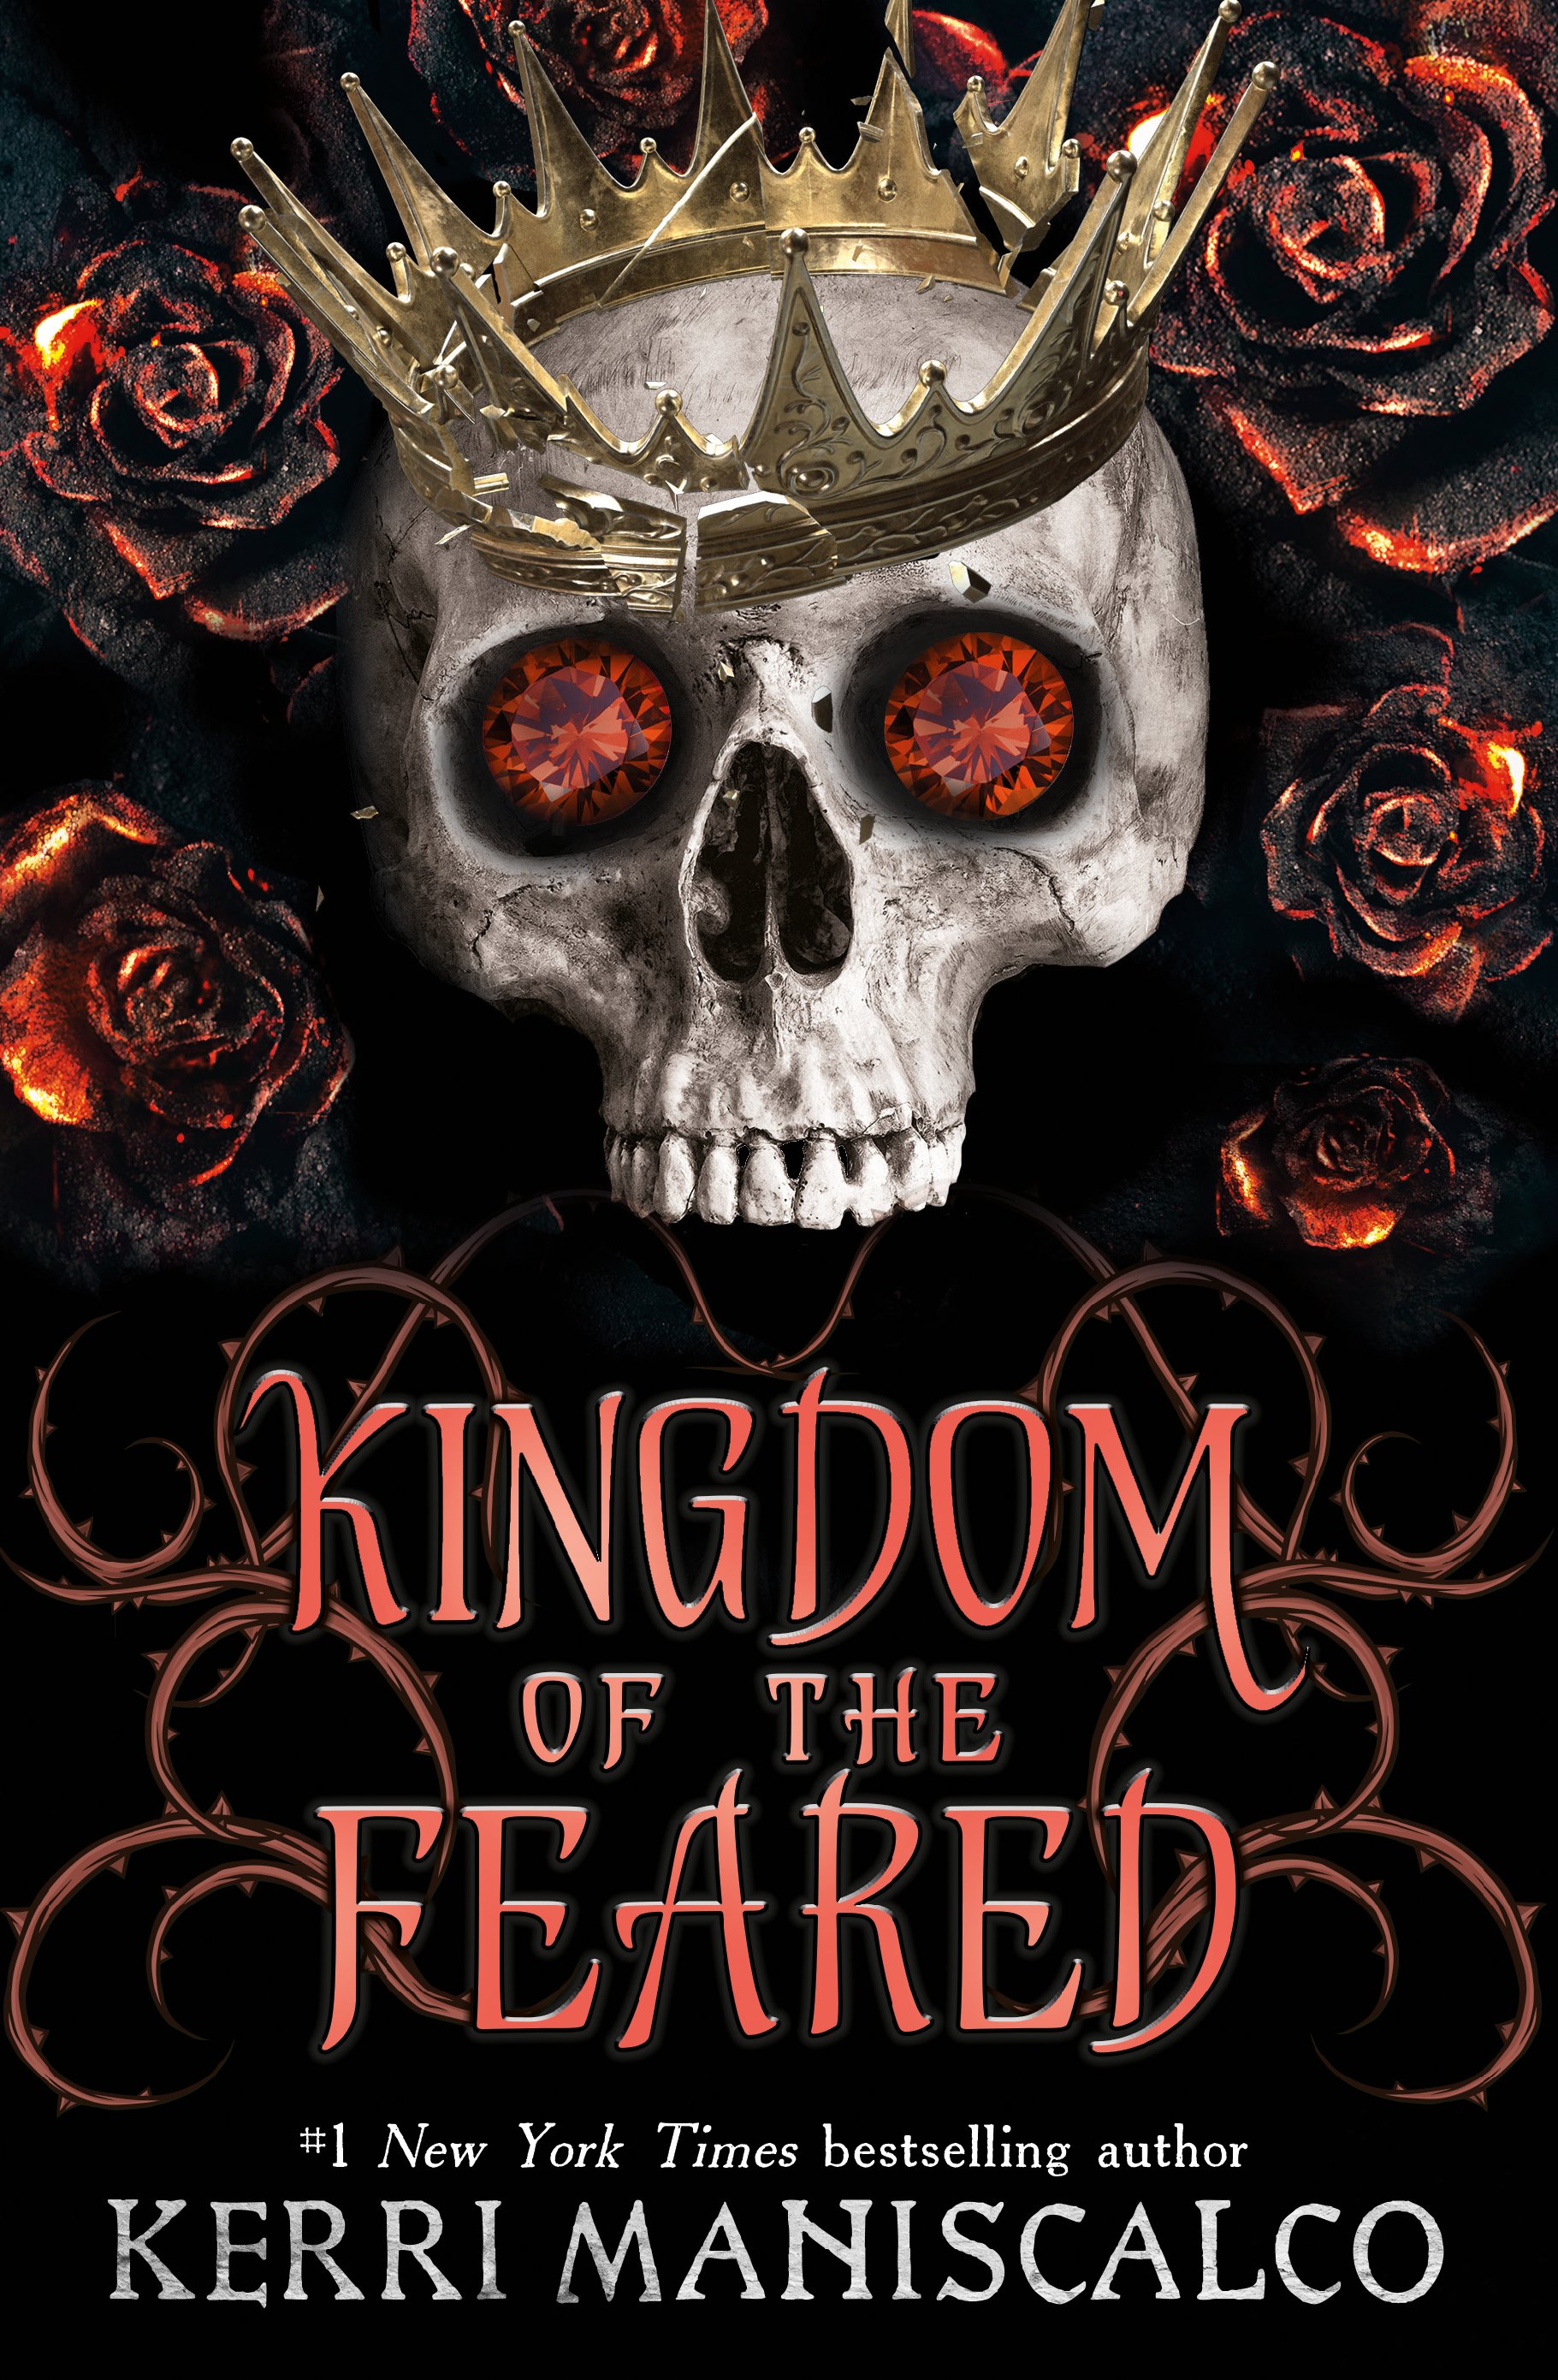 Kingdom of the wicked read online